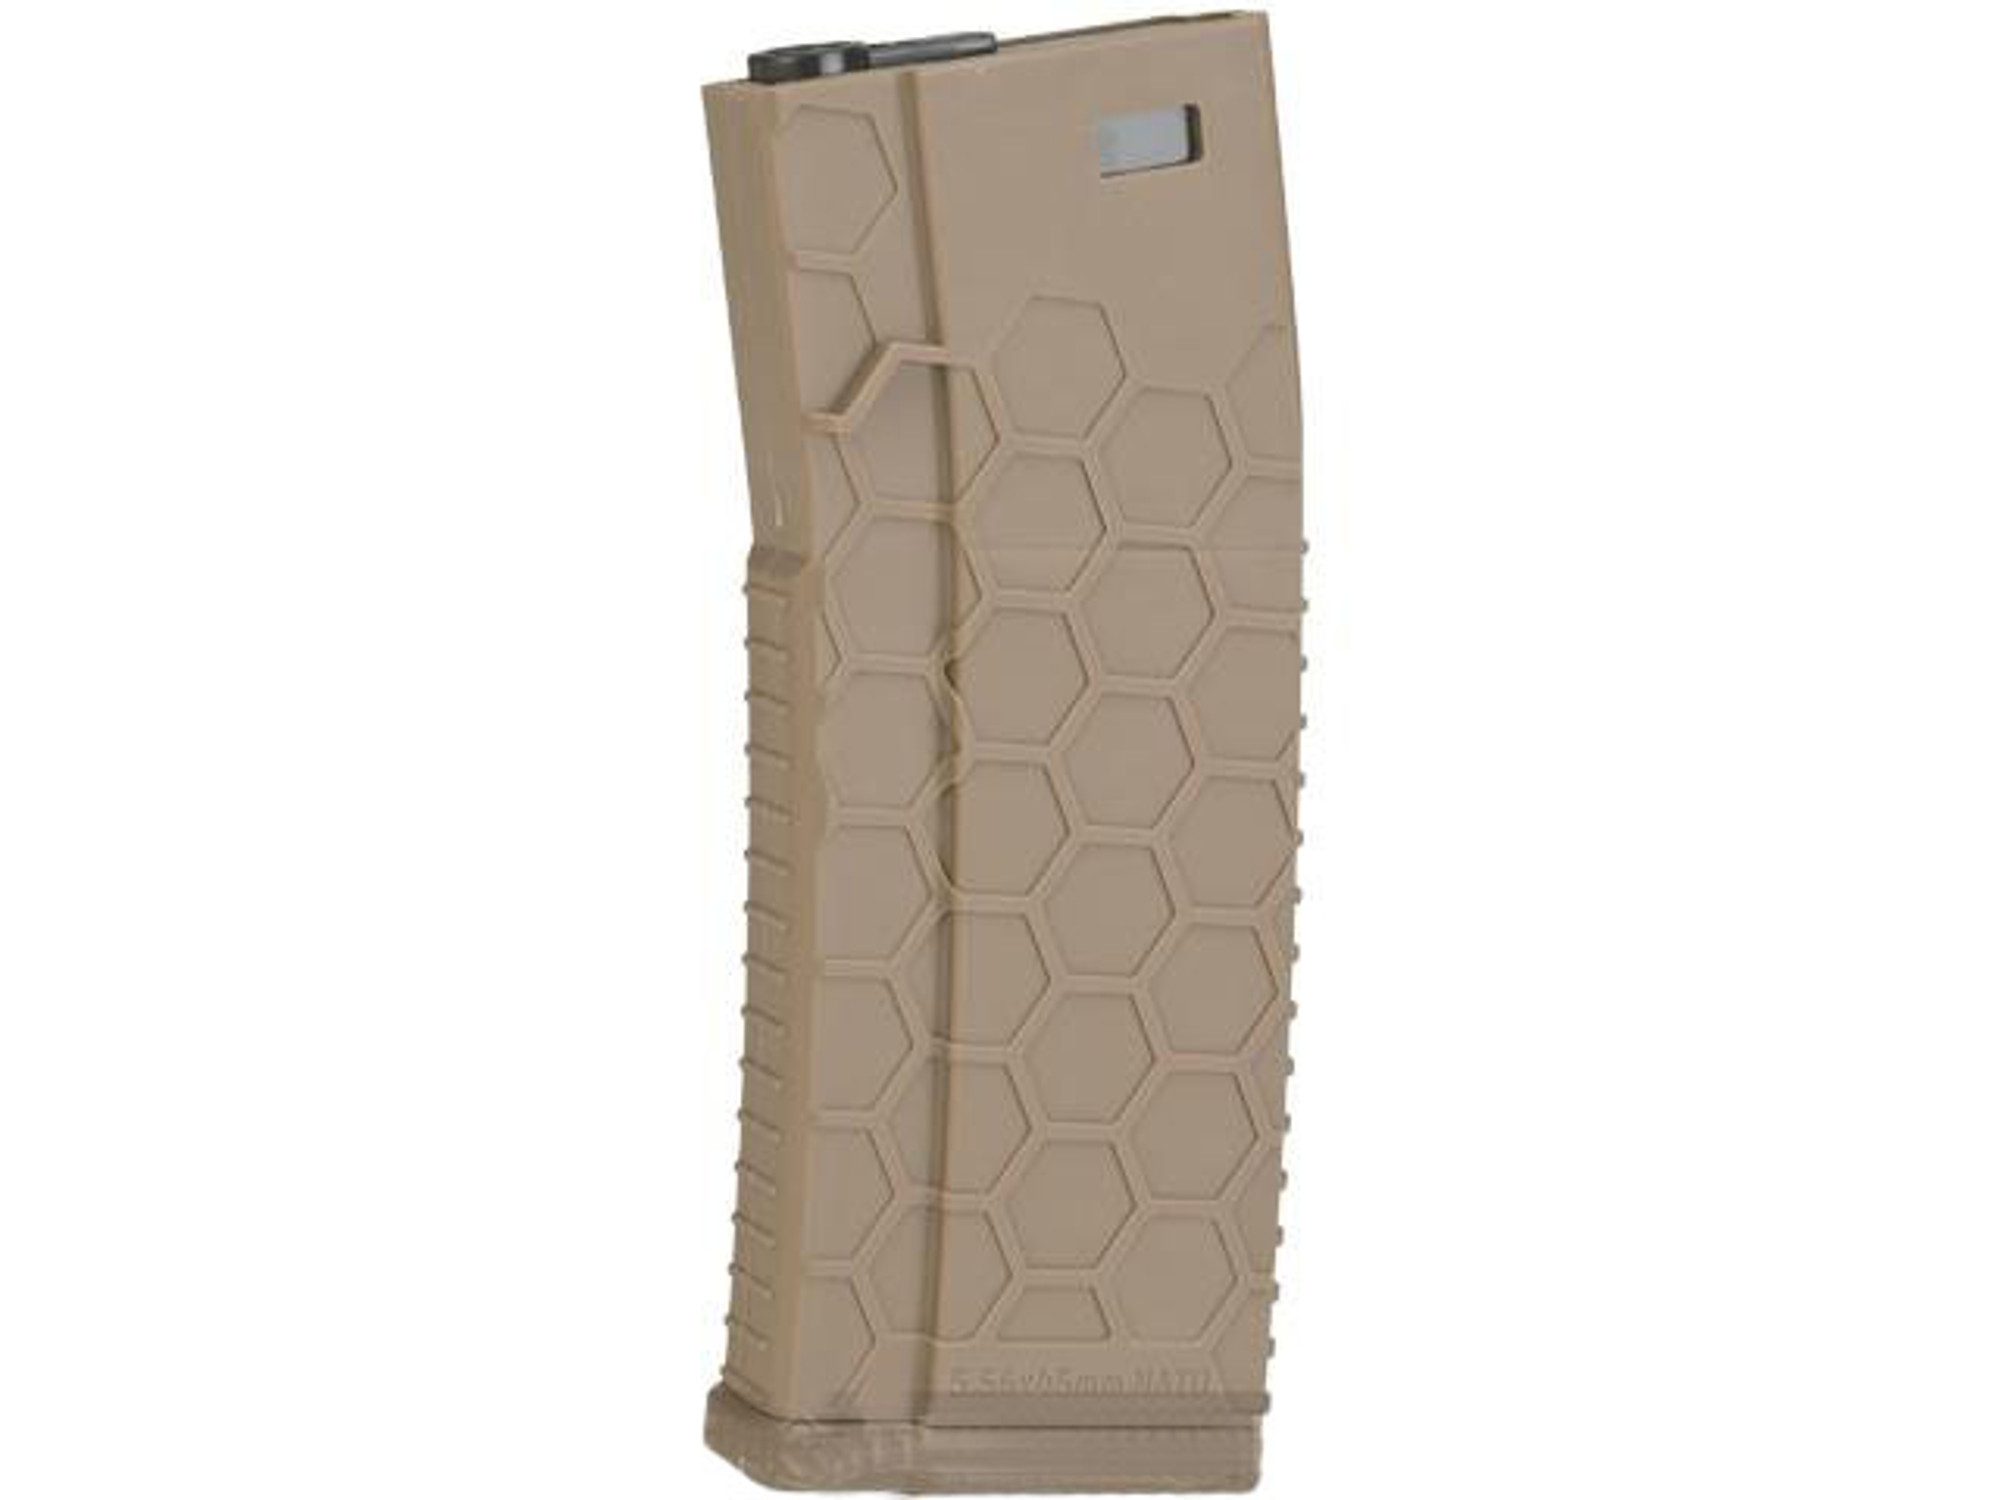 Hexmag Airsoft 120rds Polymer Mid-Cap Magazine for M4 / M16 Series Airsoft AEG Rifles (Color: Flat Dark Earth / Single)